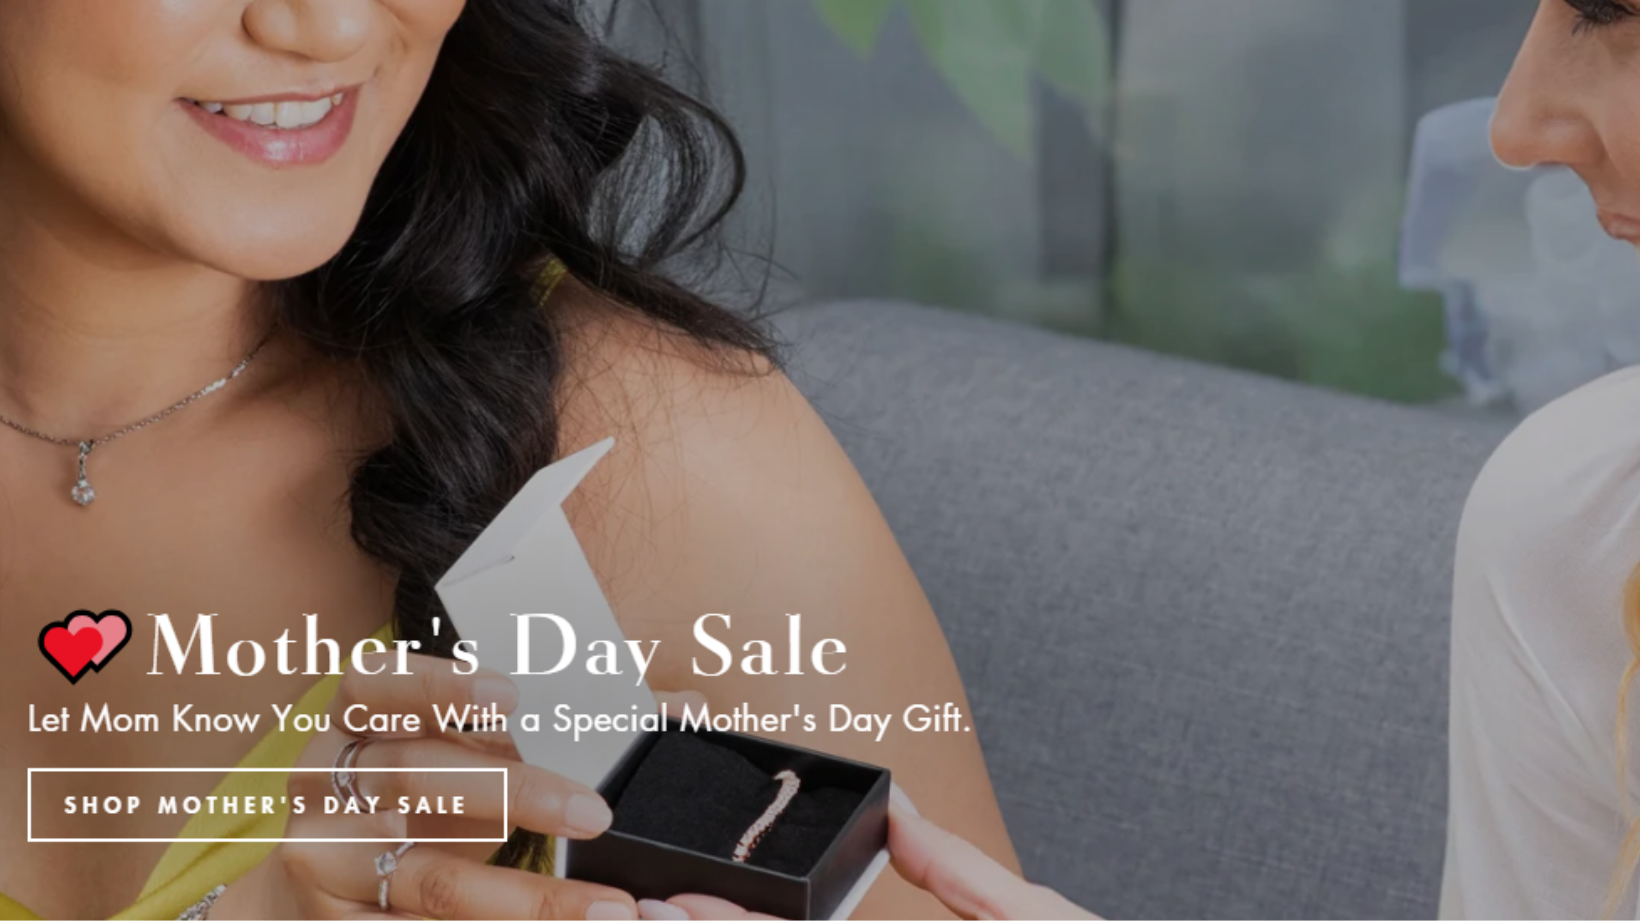 Mother's Day Jewelry Sale: Treat Mom to Something Special from Cate & Chloe